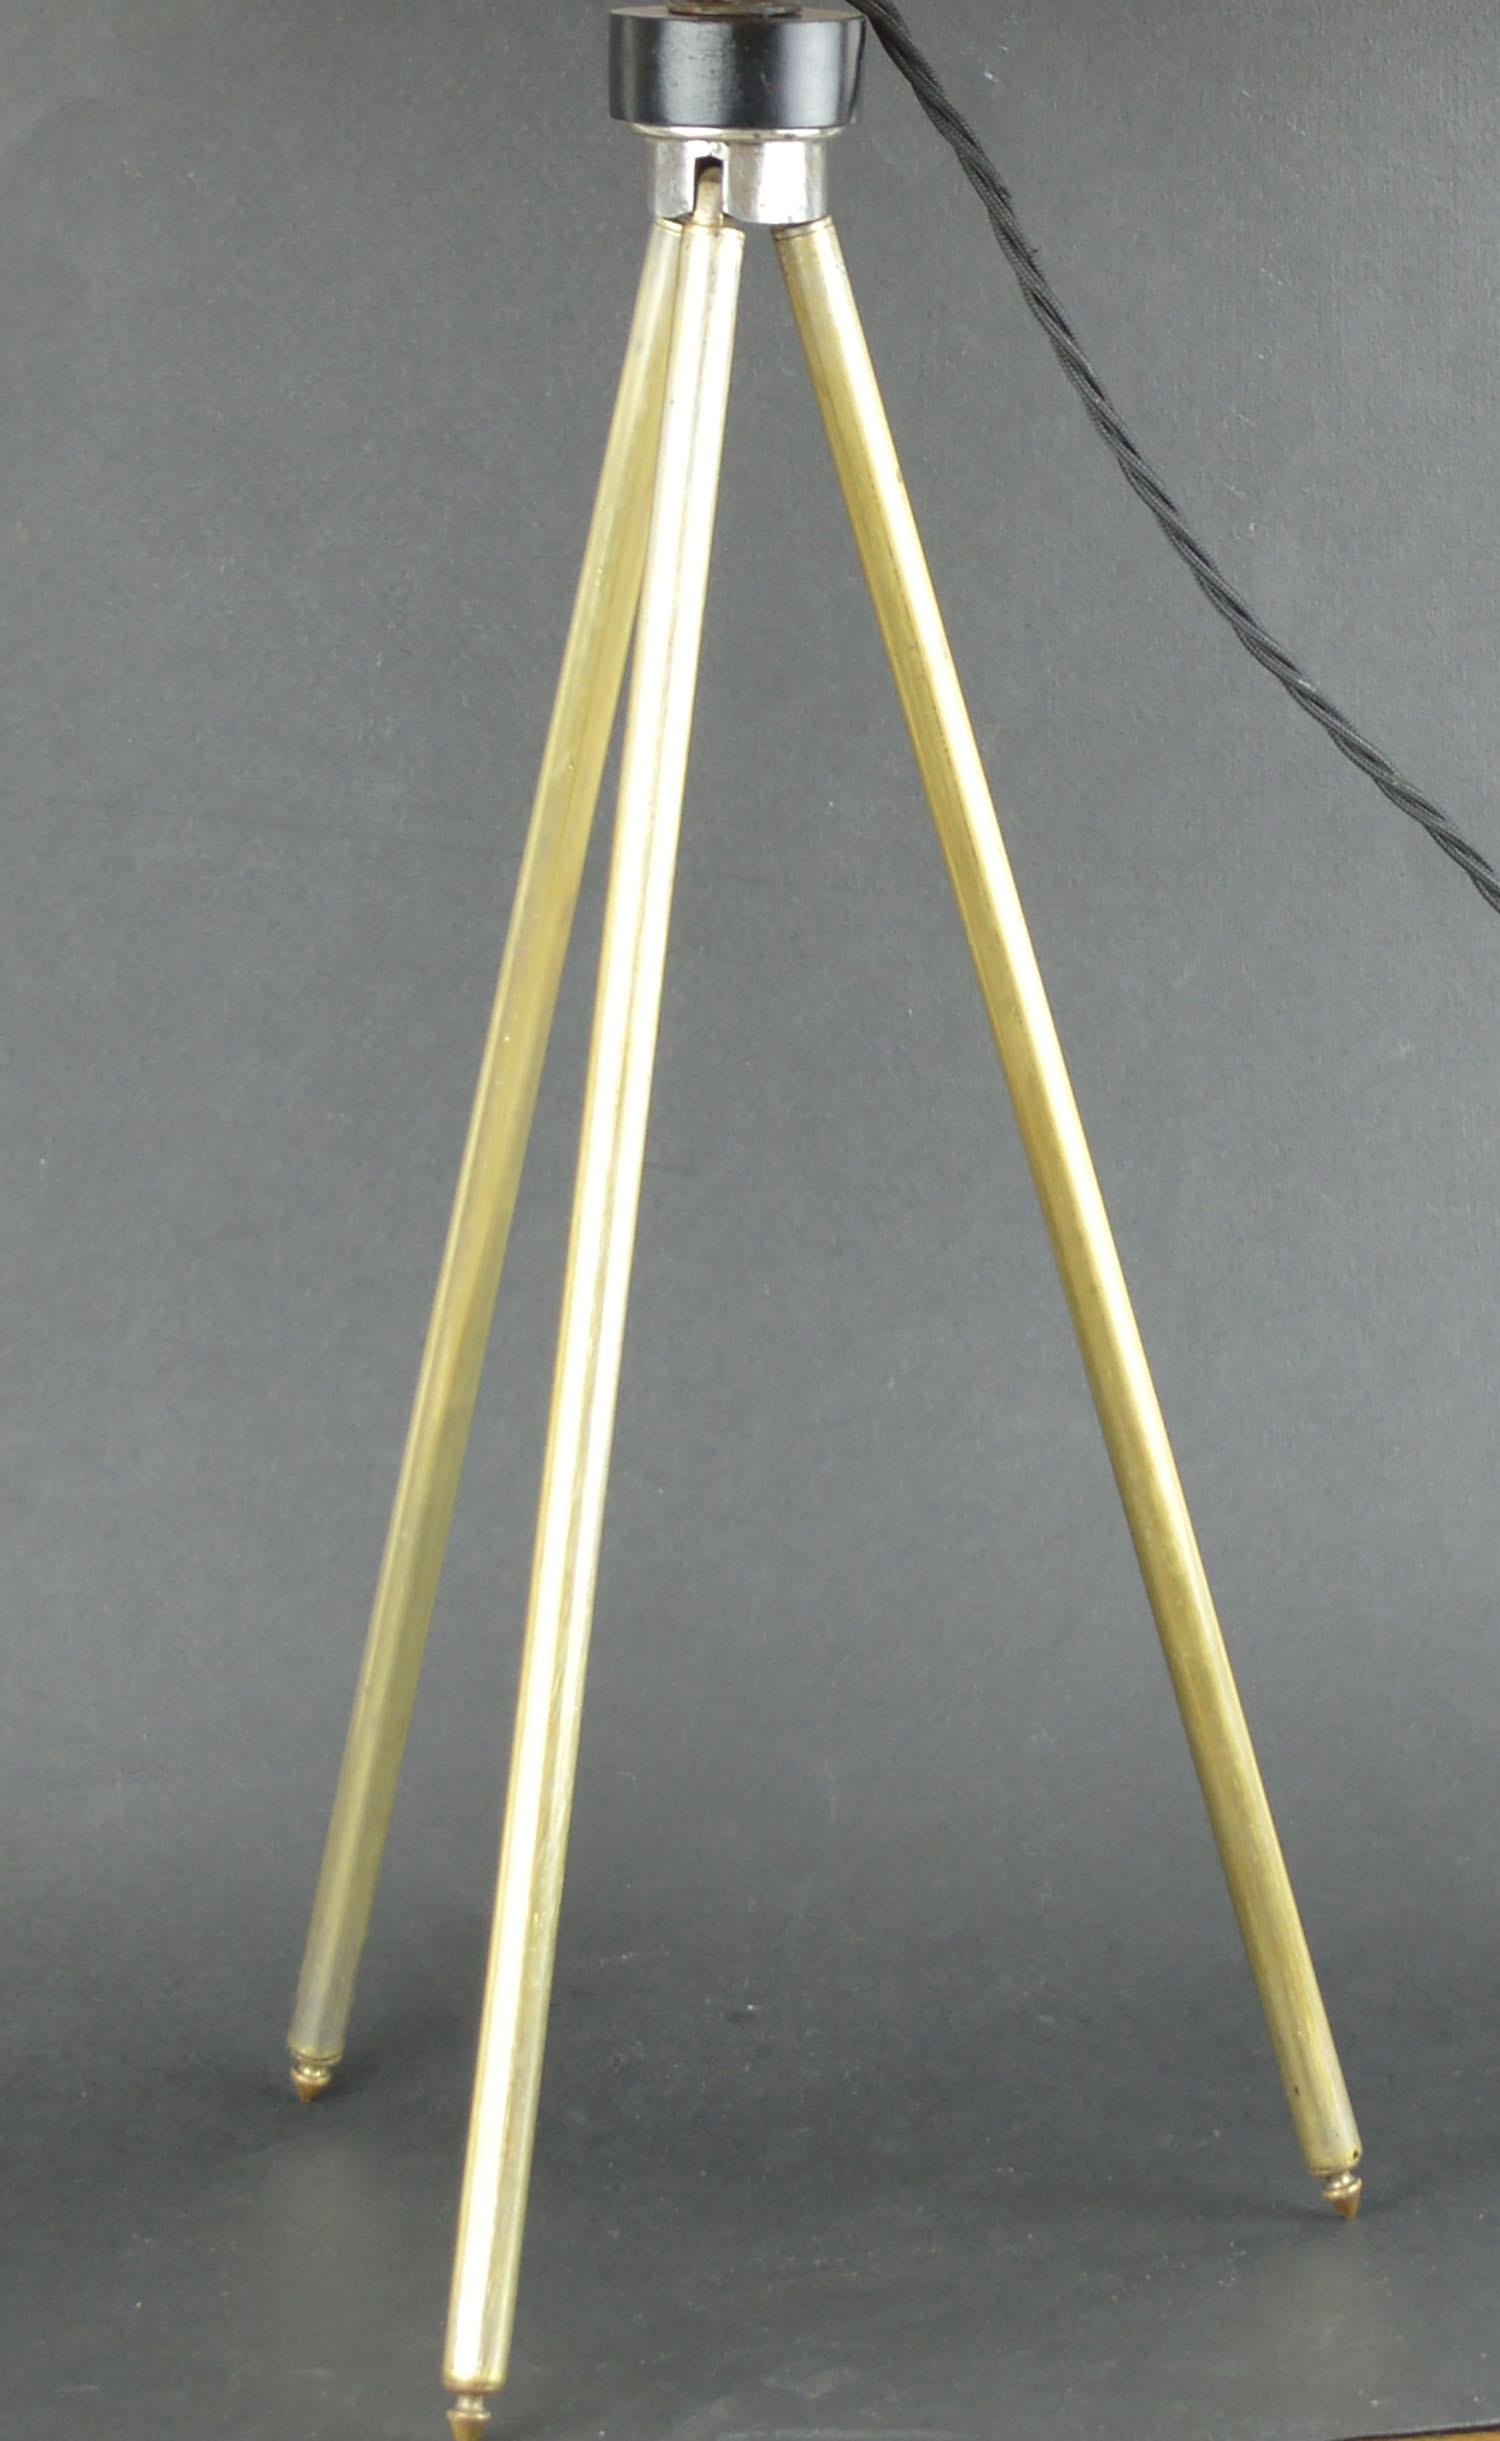 Super brushed brass tripod table lamp. Yellow velvet shade

Telescopic so the height can be adjusted. The measurement given below relates to the position in the image.

Converted from a camera tripod.

Re-wired to UK standards.

Not